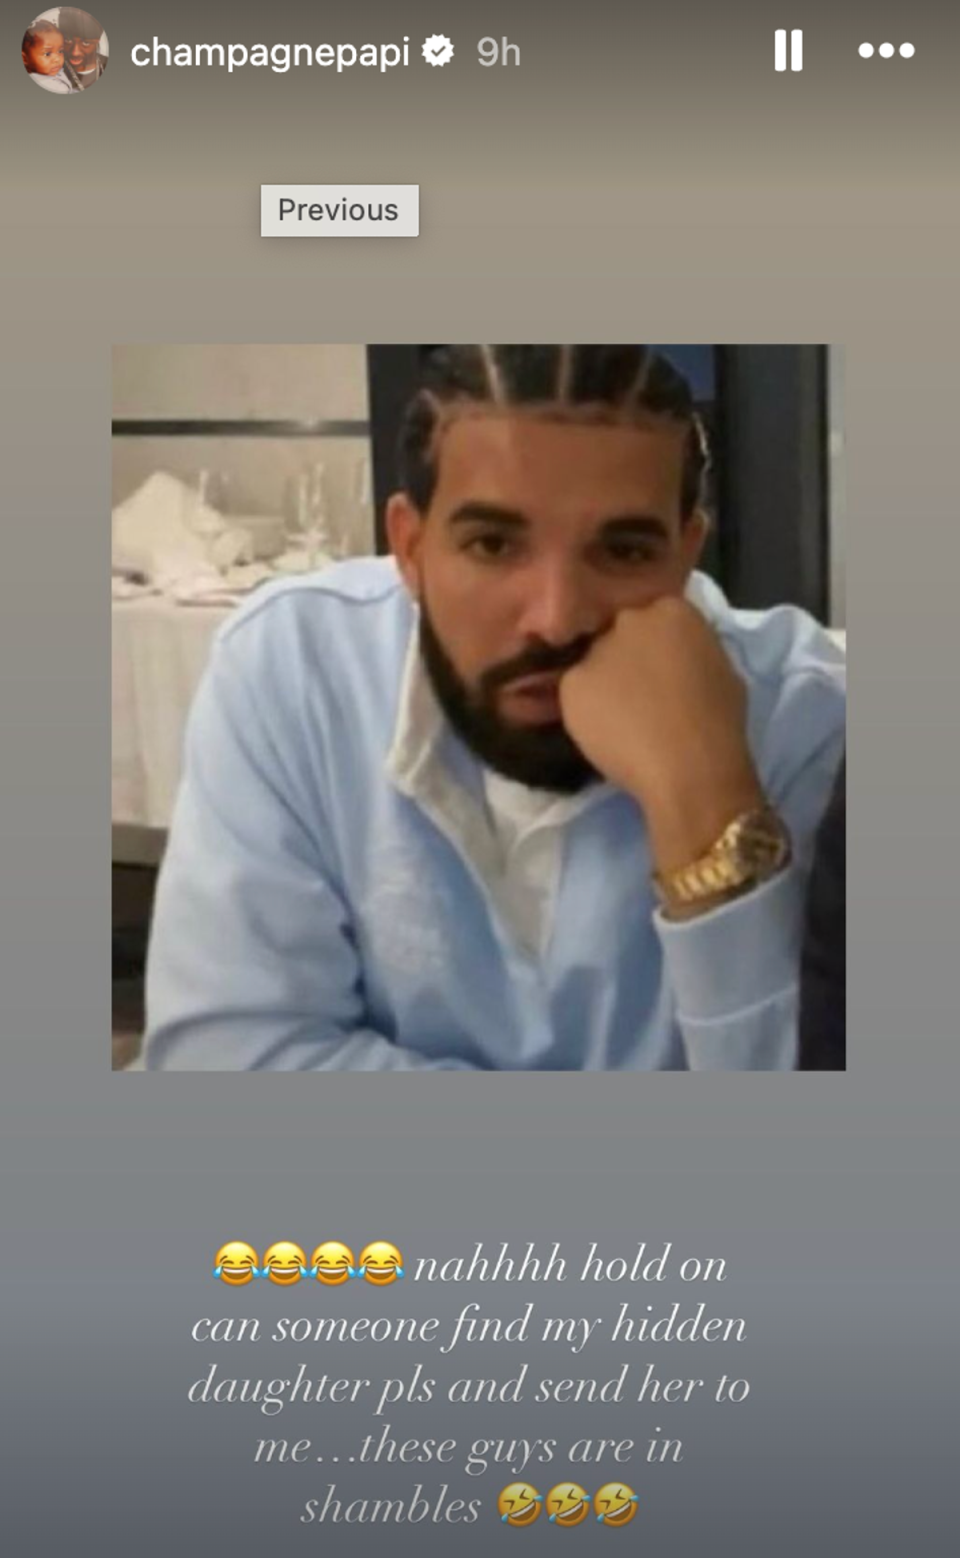 Drake responds to Kendrick Lamar’s new diss track that accuses him of having a secret daughter (@champagnepapi)